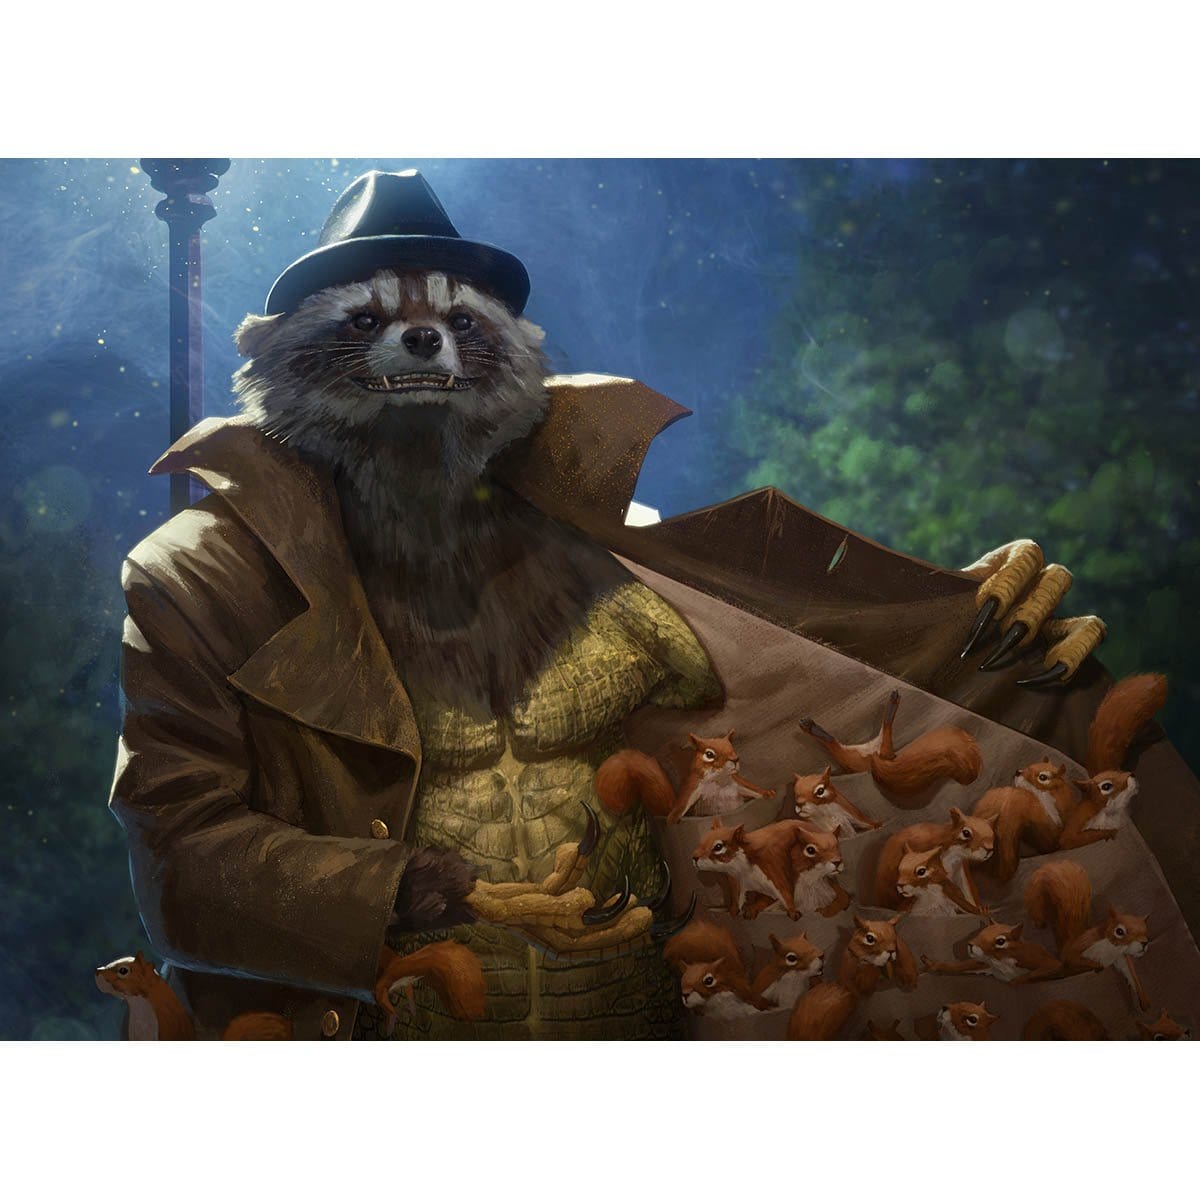 Squirrel Dealer Print - Print - Original Magic Art - Accessories for Magic the Gathering and other card games